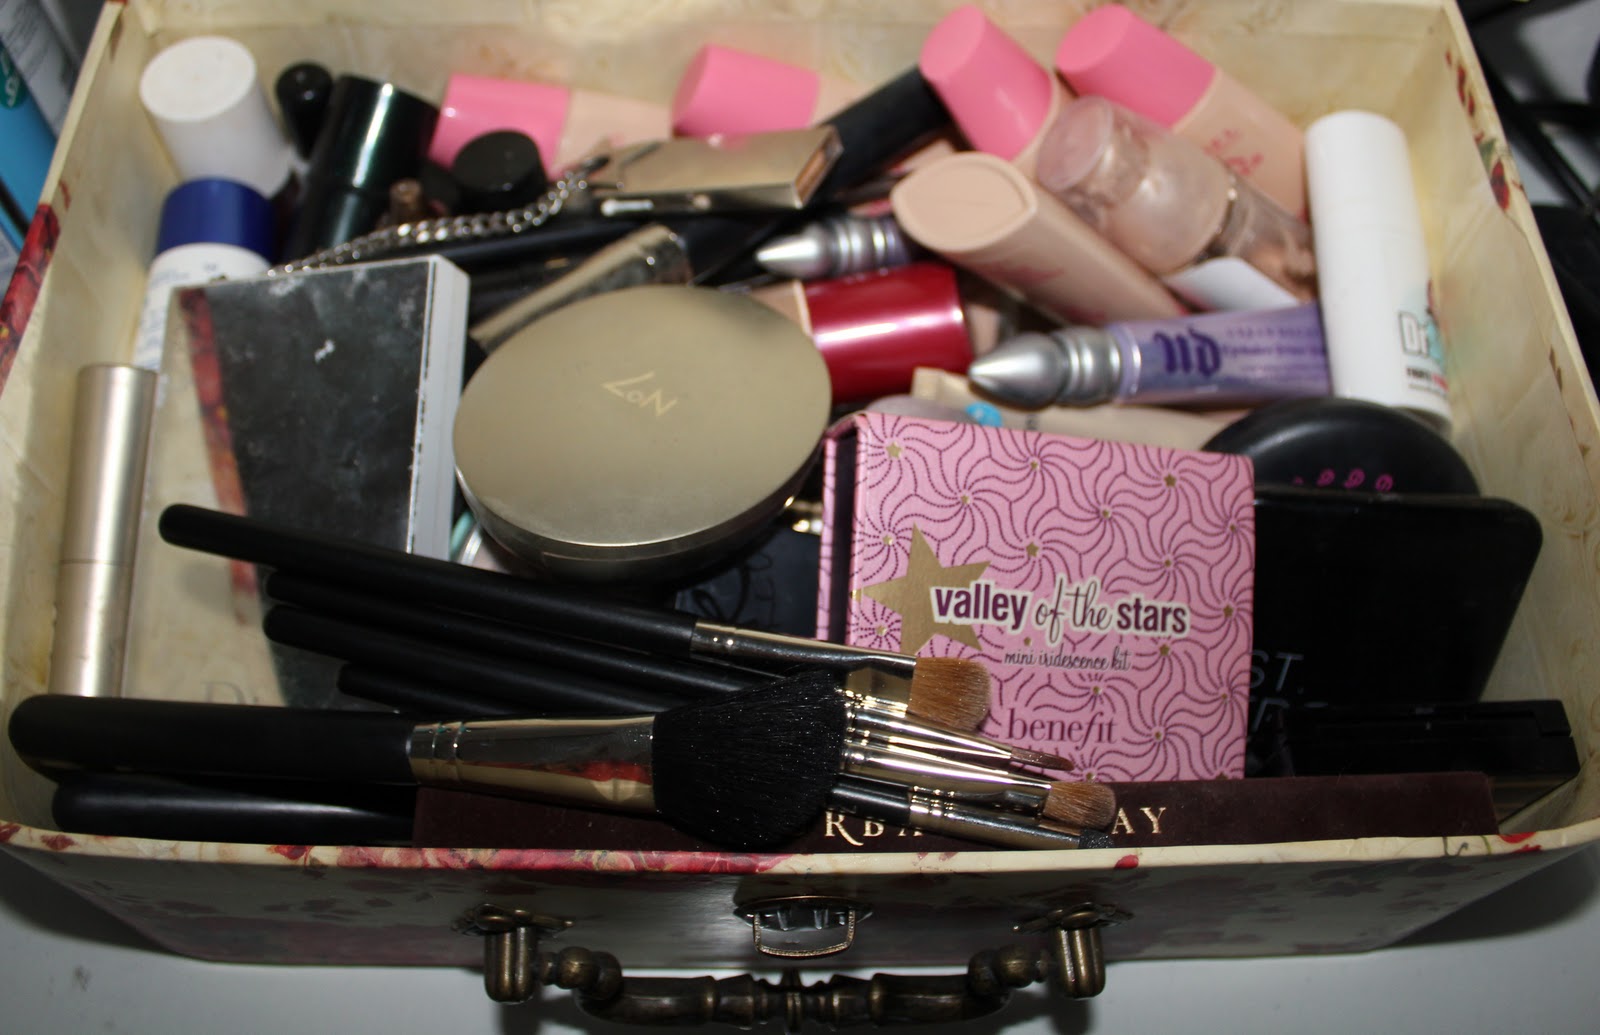 Beauty Rehab: The First Step is Admitting You Have a Problem